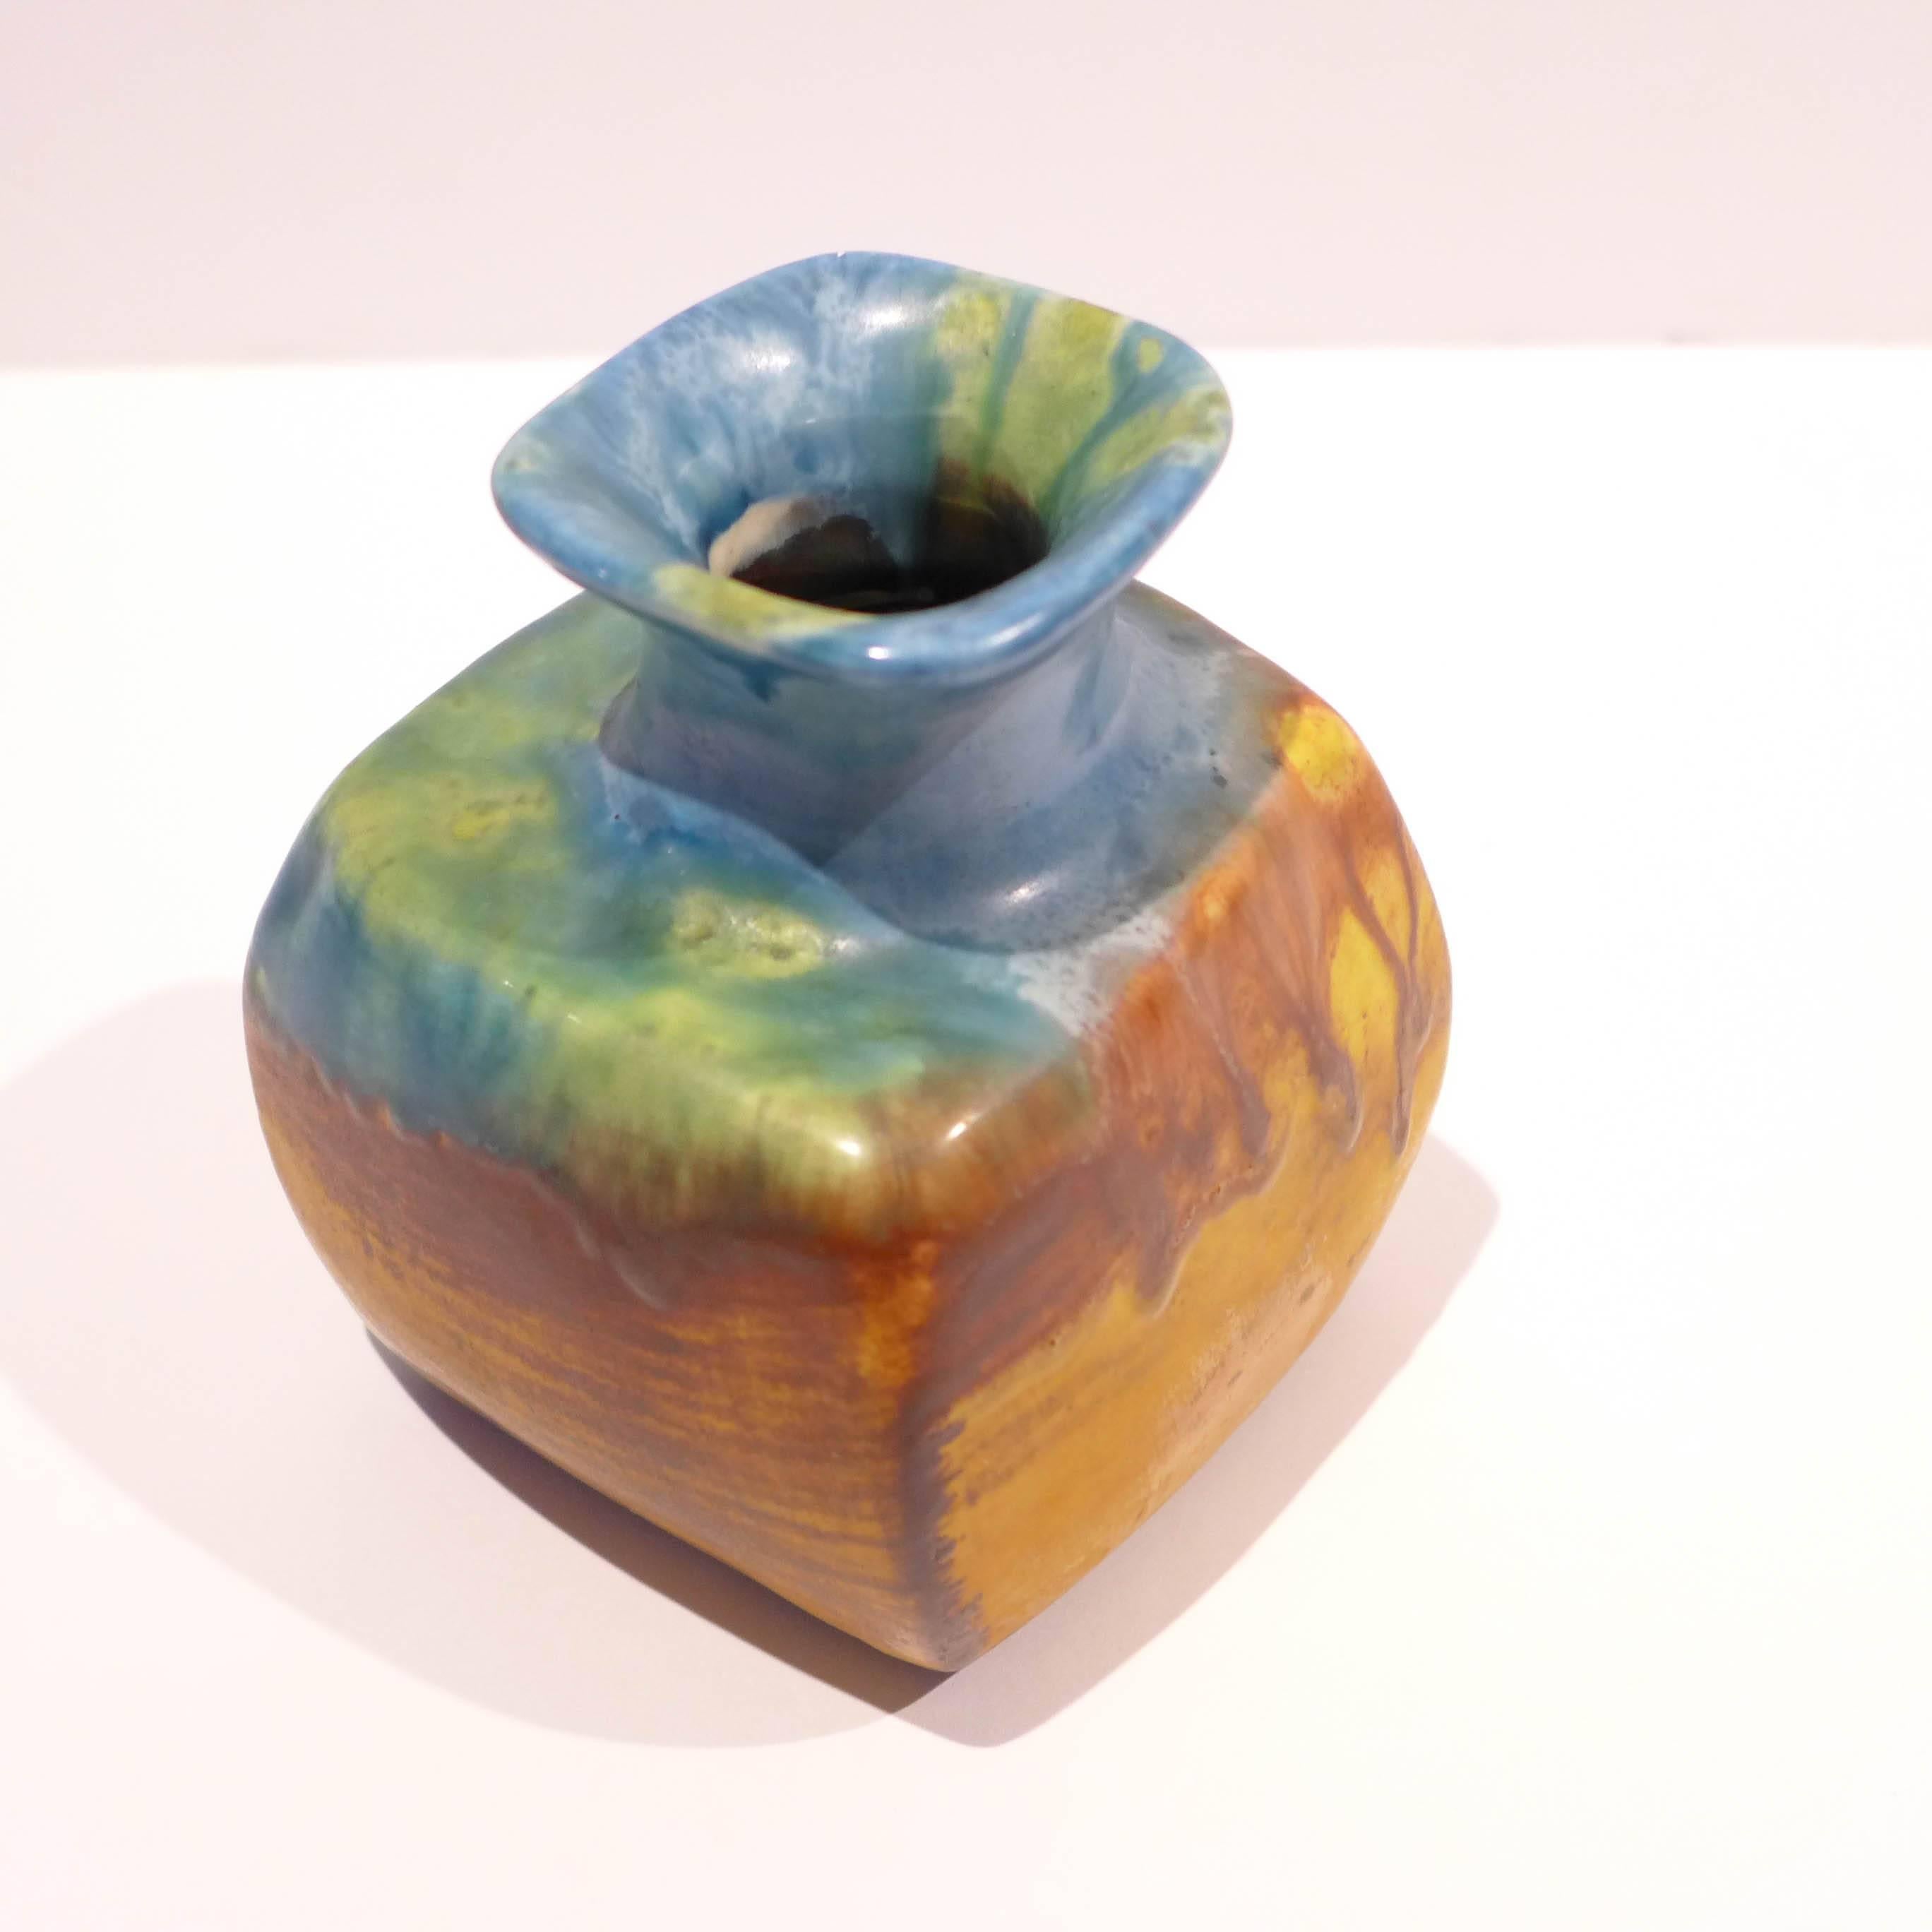 Small vase with colorful drip glaze by Italian ceramist and designer Marcello Fantoni, likely distributed by Raymor, circa 1950s.